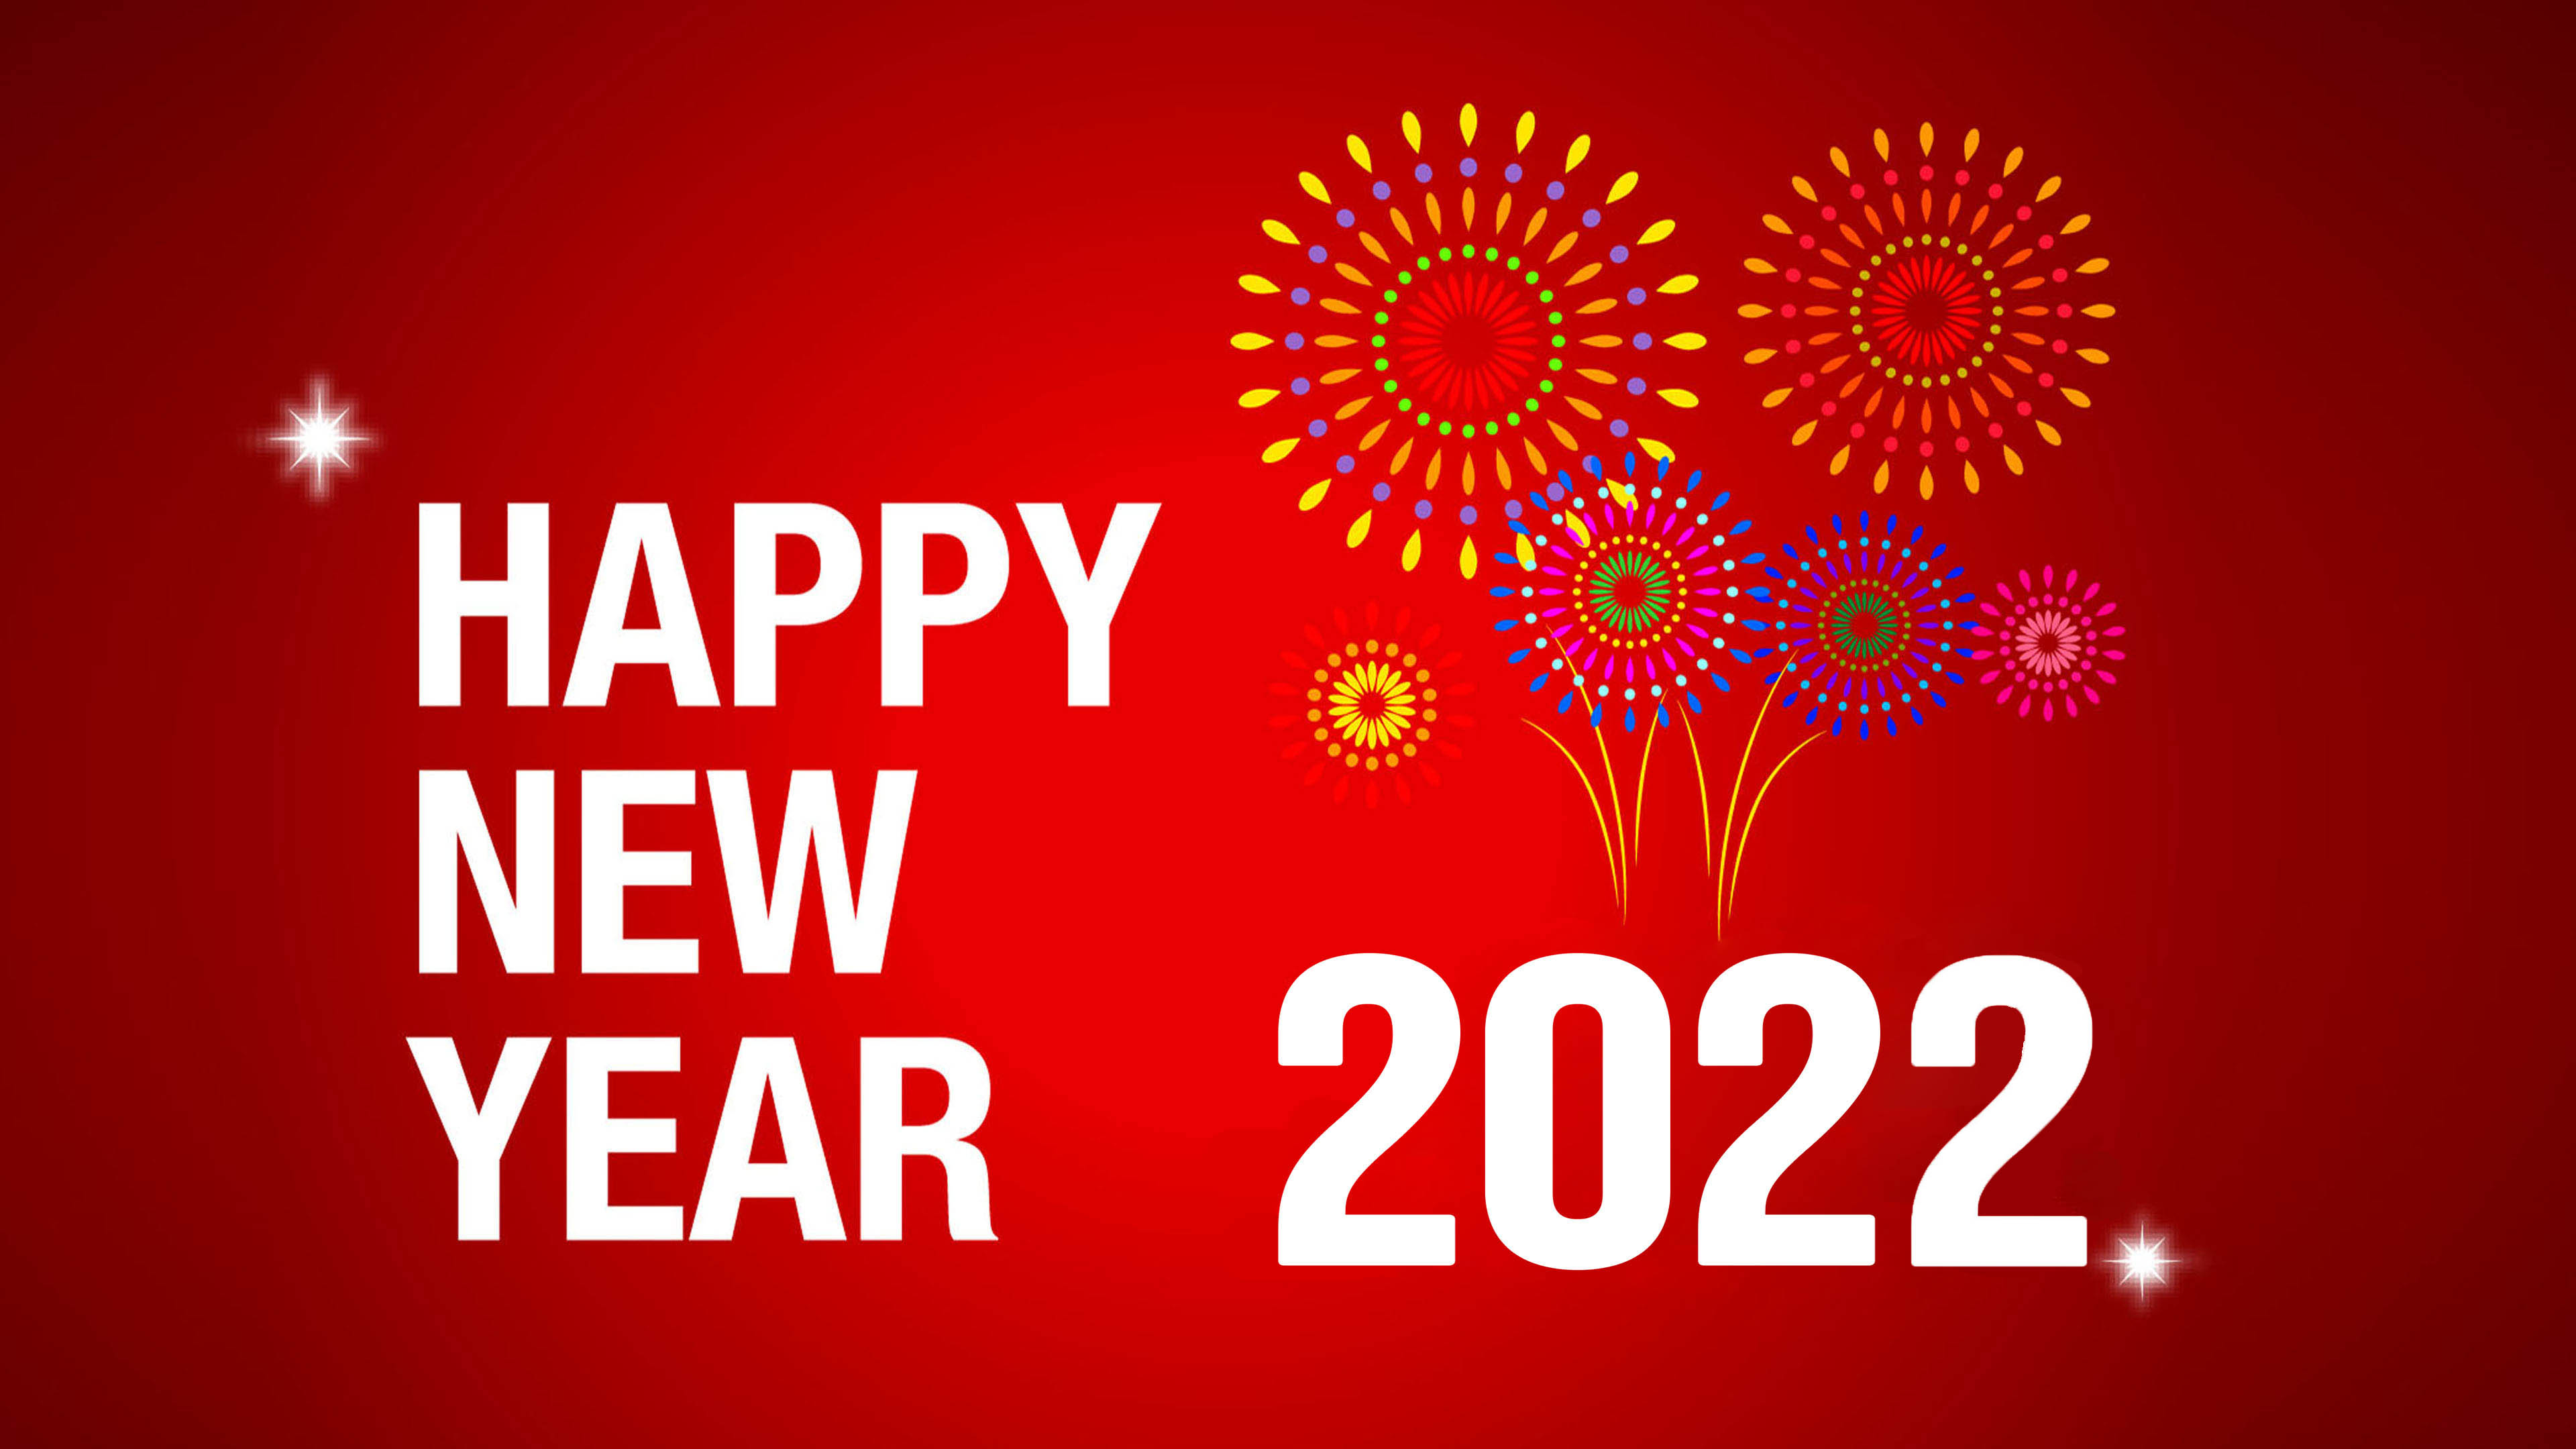 Happy New 2022 Year New Year's Celebration New Year's Greeting Card Images Wallpapers  Hd 3840x2160 : 